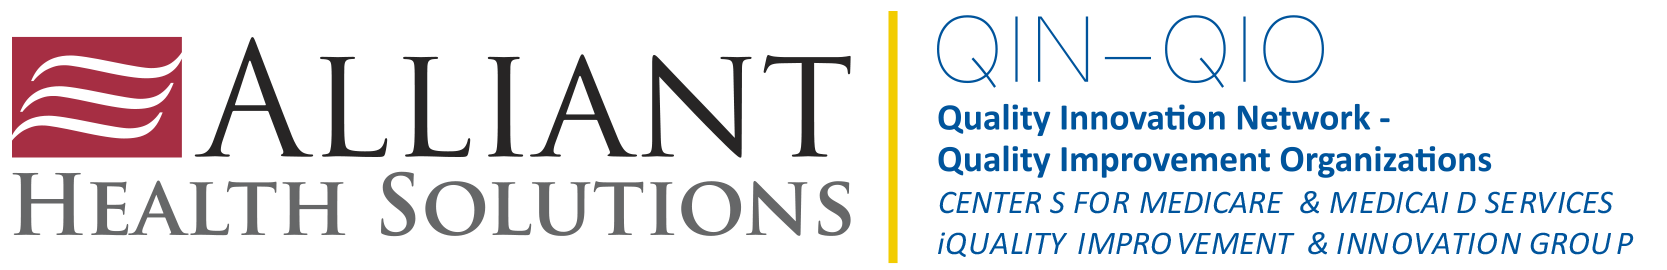 Quality Improvement Organizations logo co-branded with Alliant Health Solutions logo